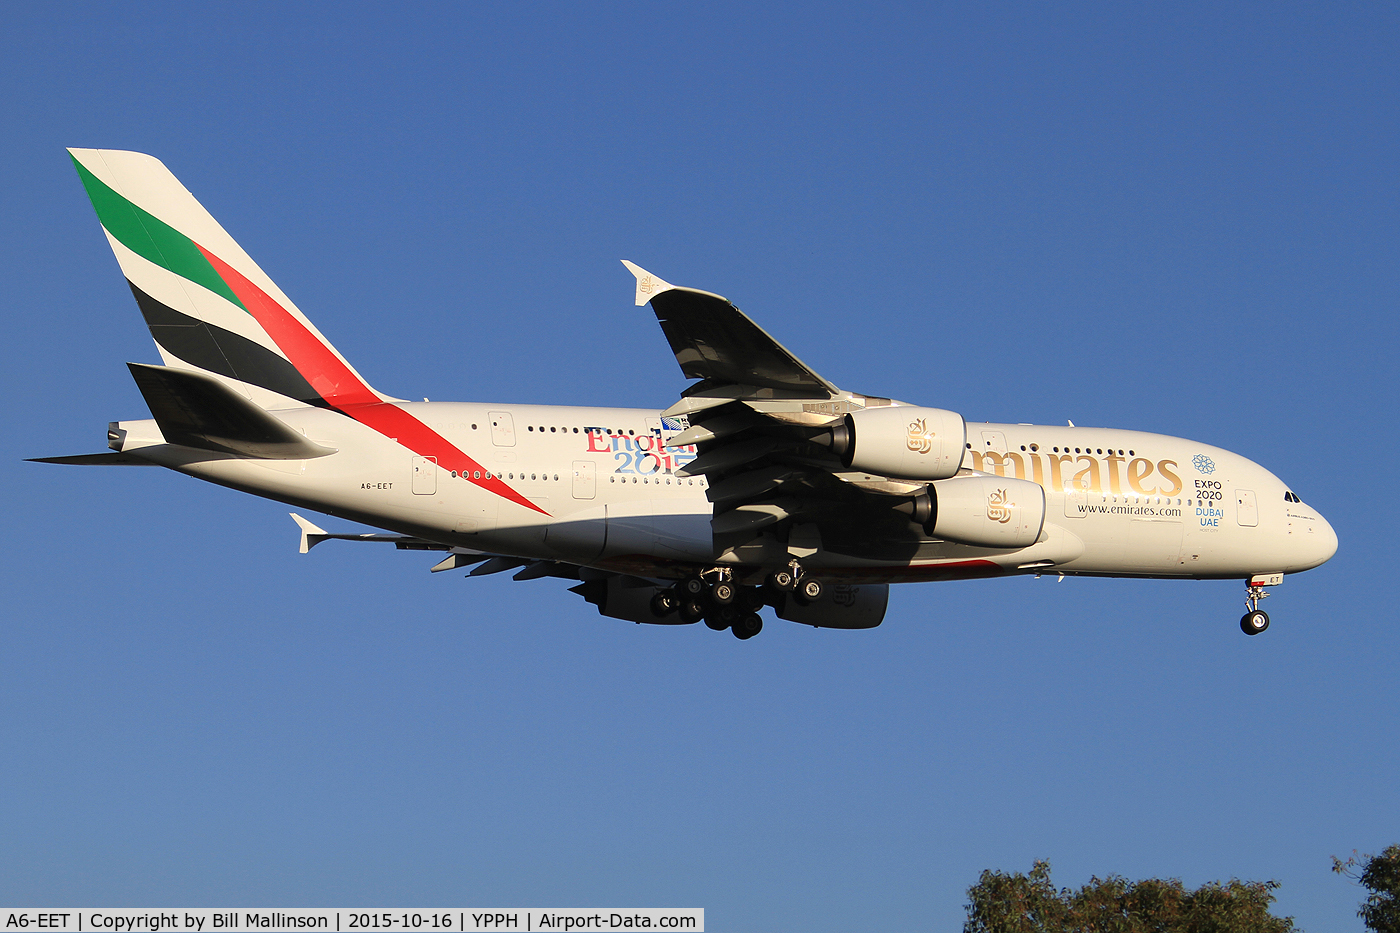 A6-EET, 2013 Airbus A380-861 C/N 142, finals to 21